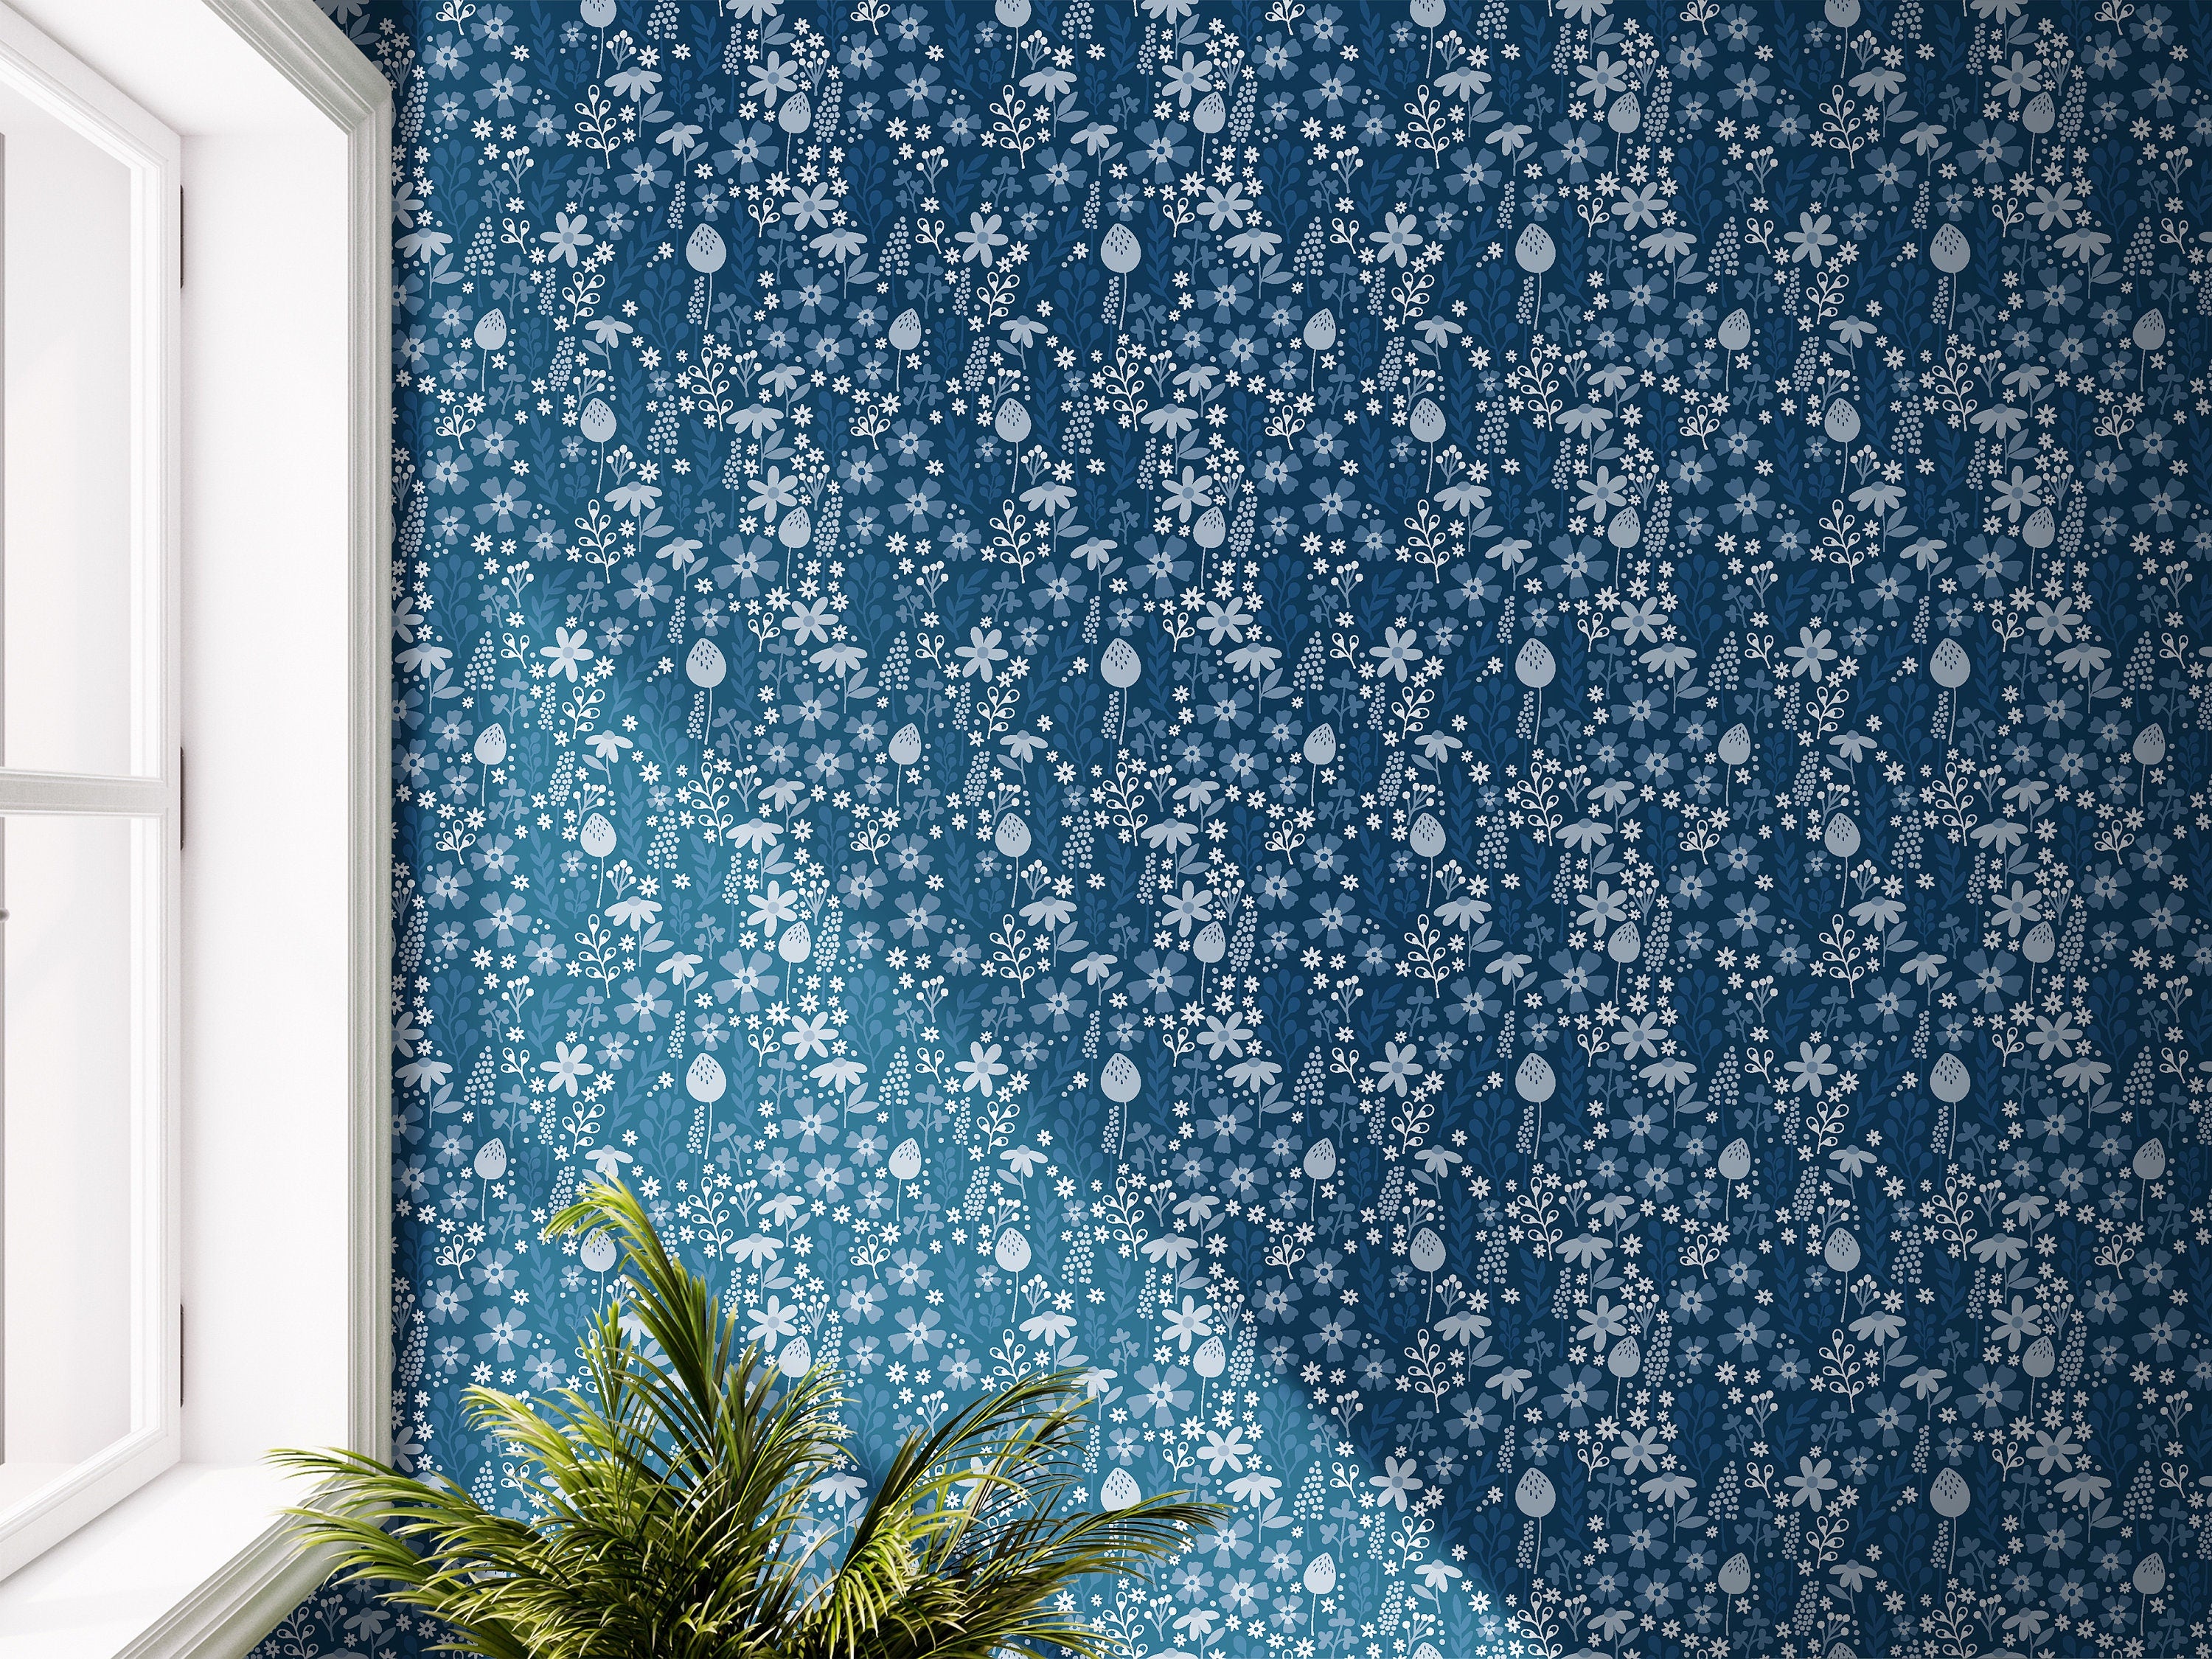 Busy Blue Floral Wallpaper Peel and Stick Wallpaper Removable Wallpaper Wall Decor Home Decor Wall Art Printable Wall Art Room Decor 3697 - JamesAndColors